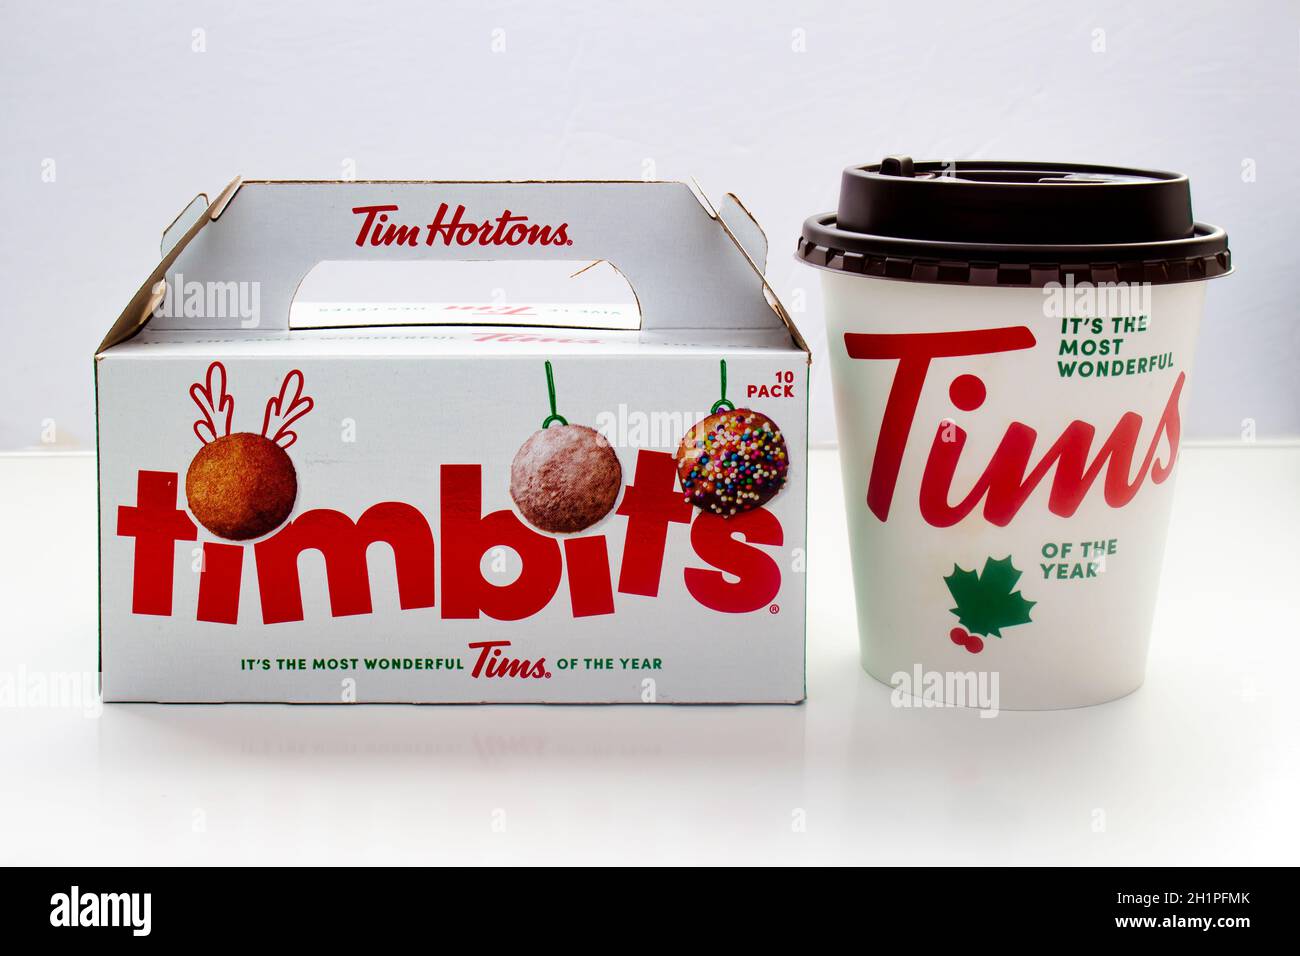 Calgary, Alberta. Canada. Jan 29, 2021. Christmas Tim Hortons coffee and Timbits box on a white background Stock Photo